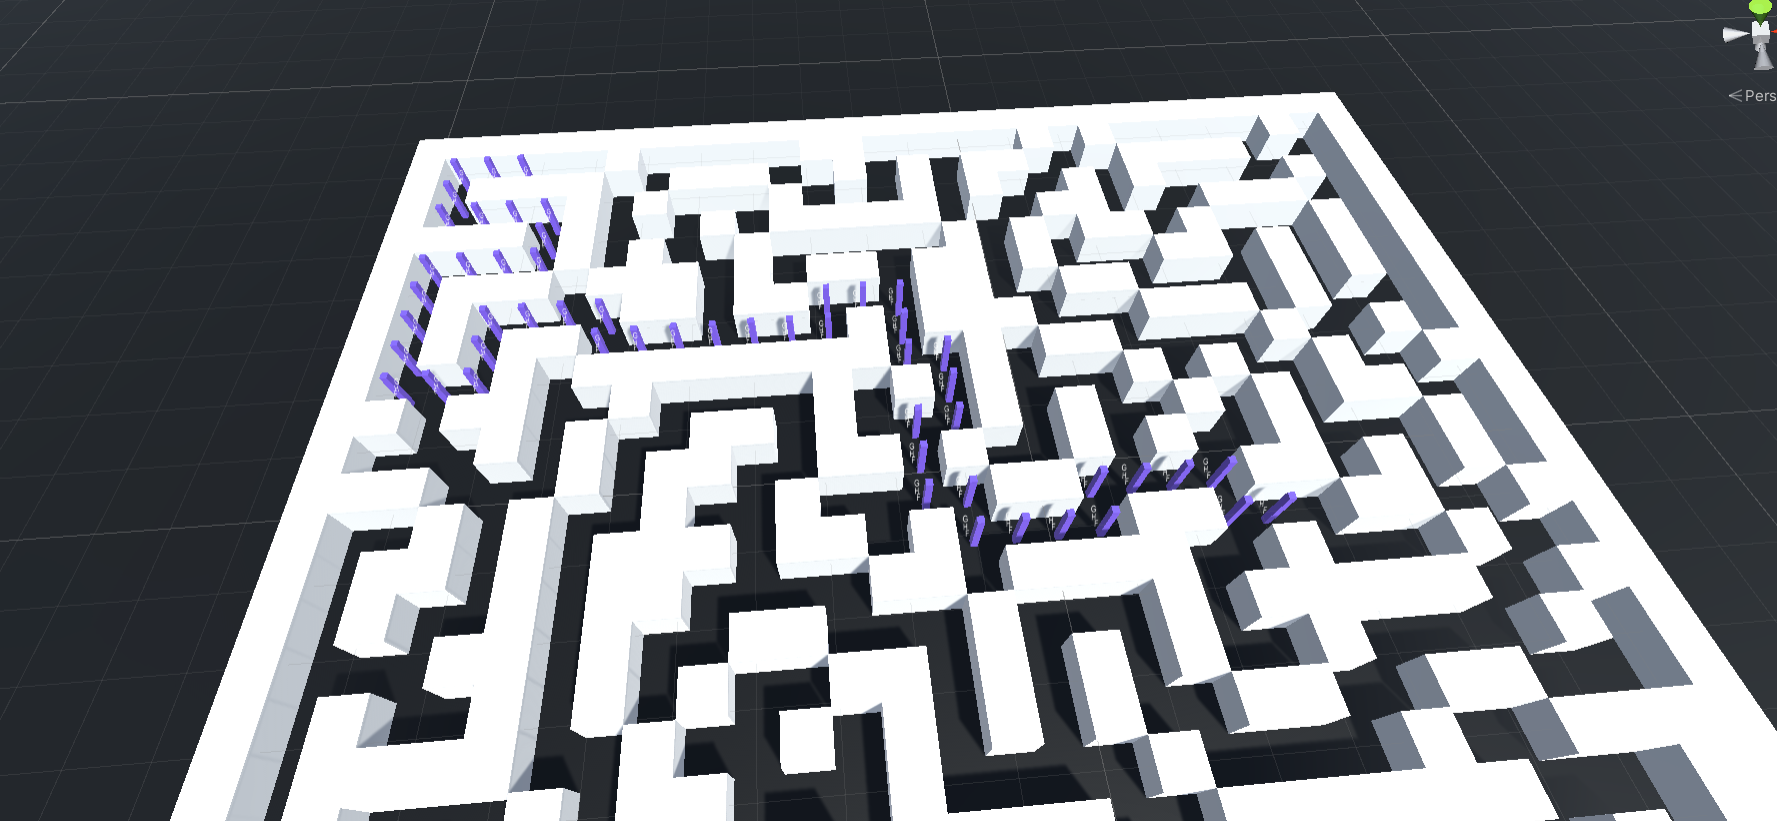 A* Algorithm for pathfinding - AI Learning